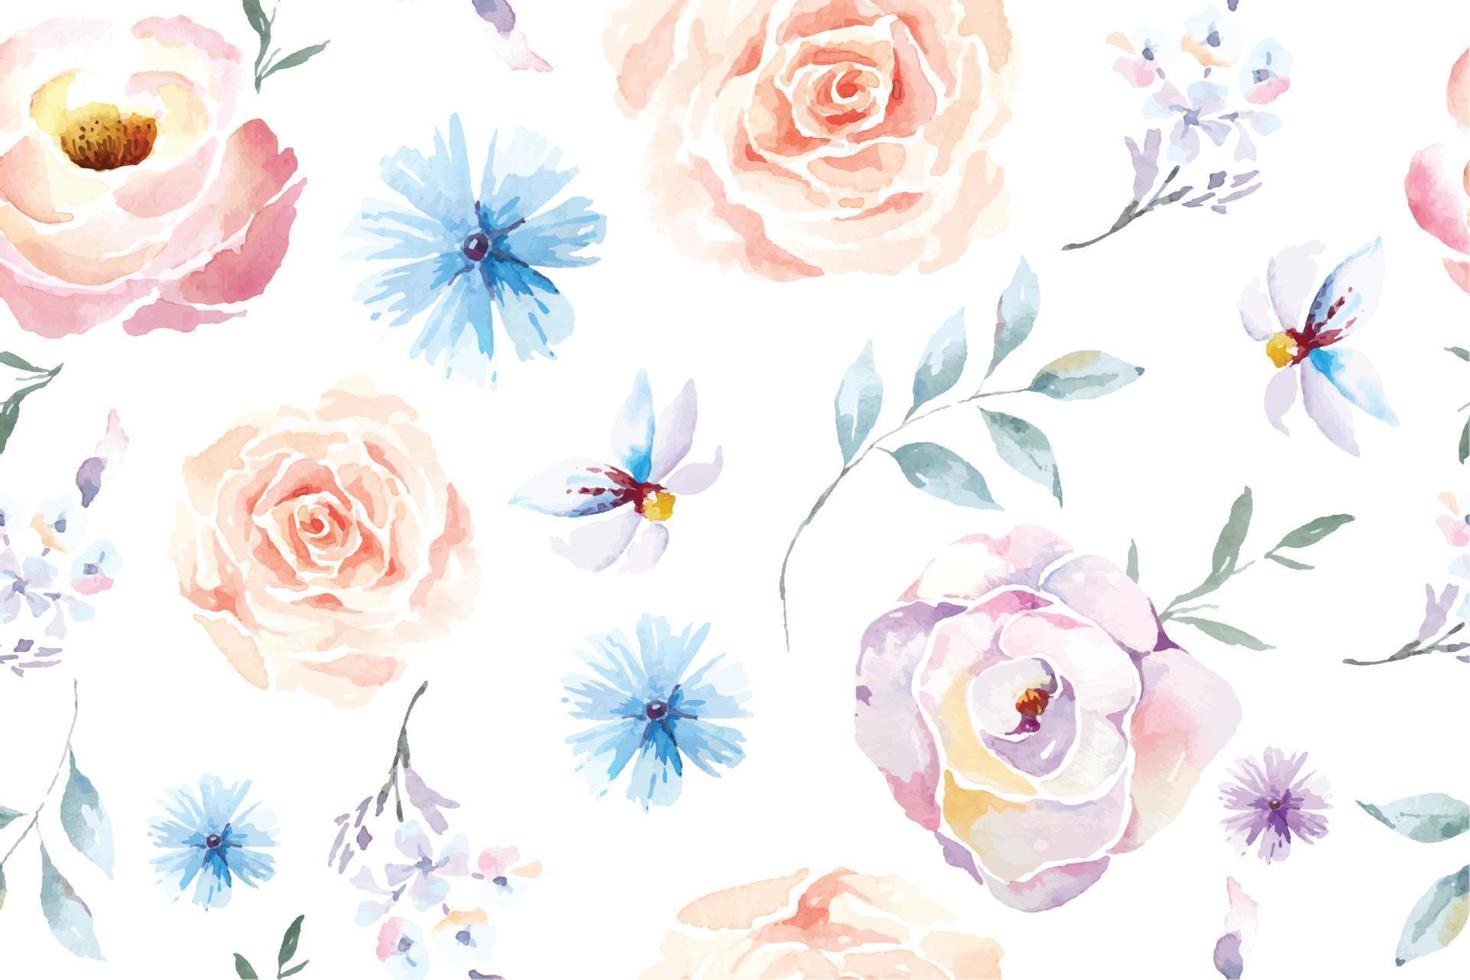 Rose seamless pattern with watercolor on white background. Designed for fabric luxurious and wallpaper, vintage style. vector